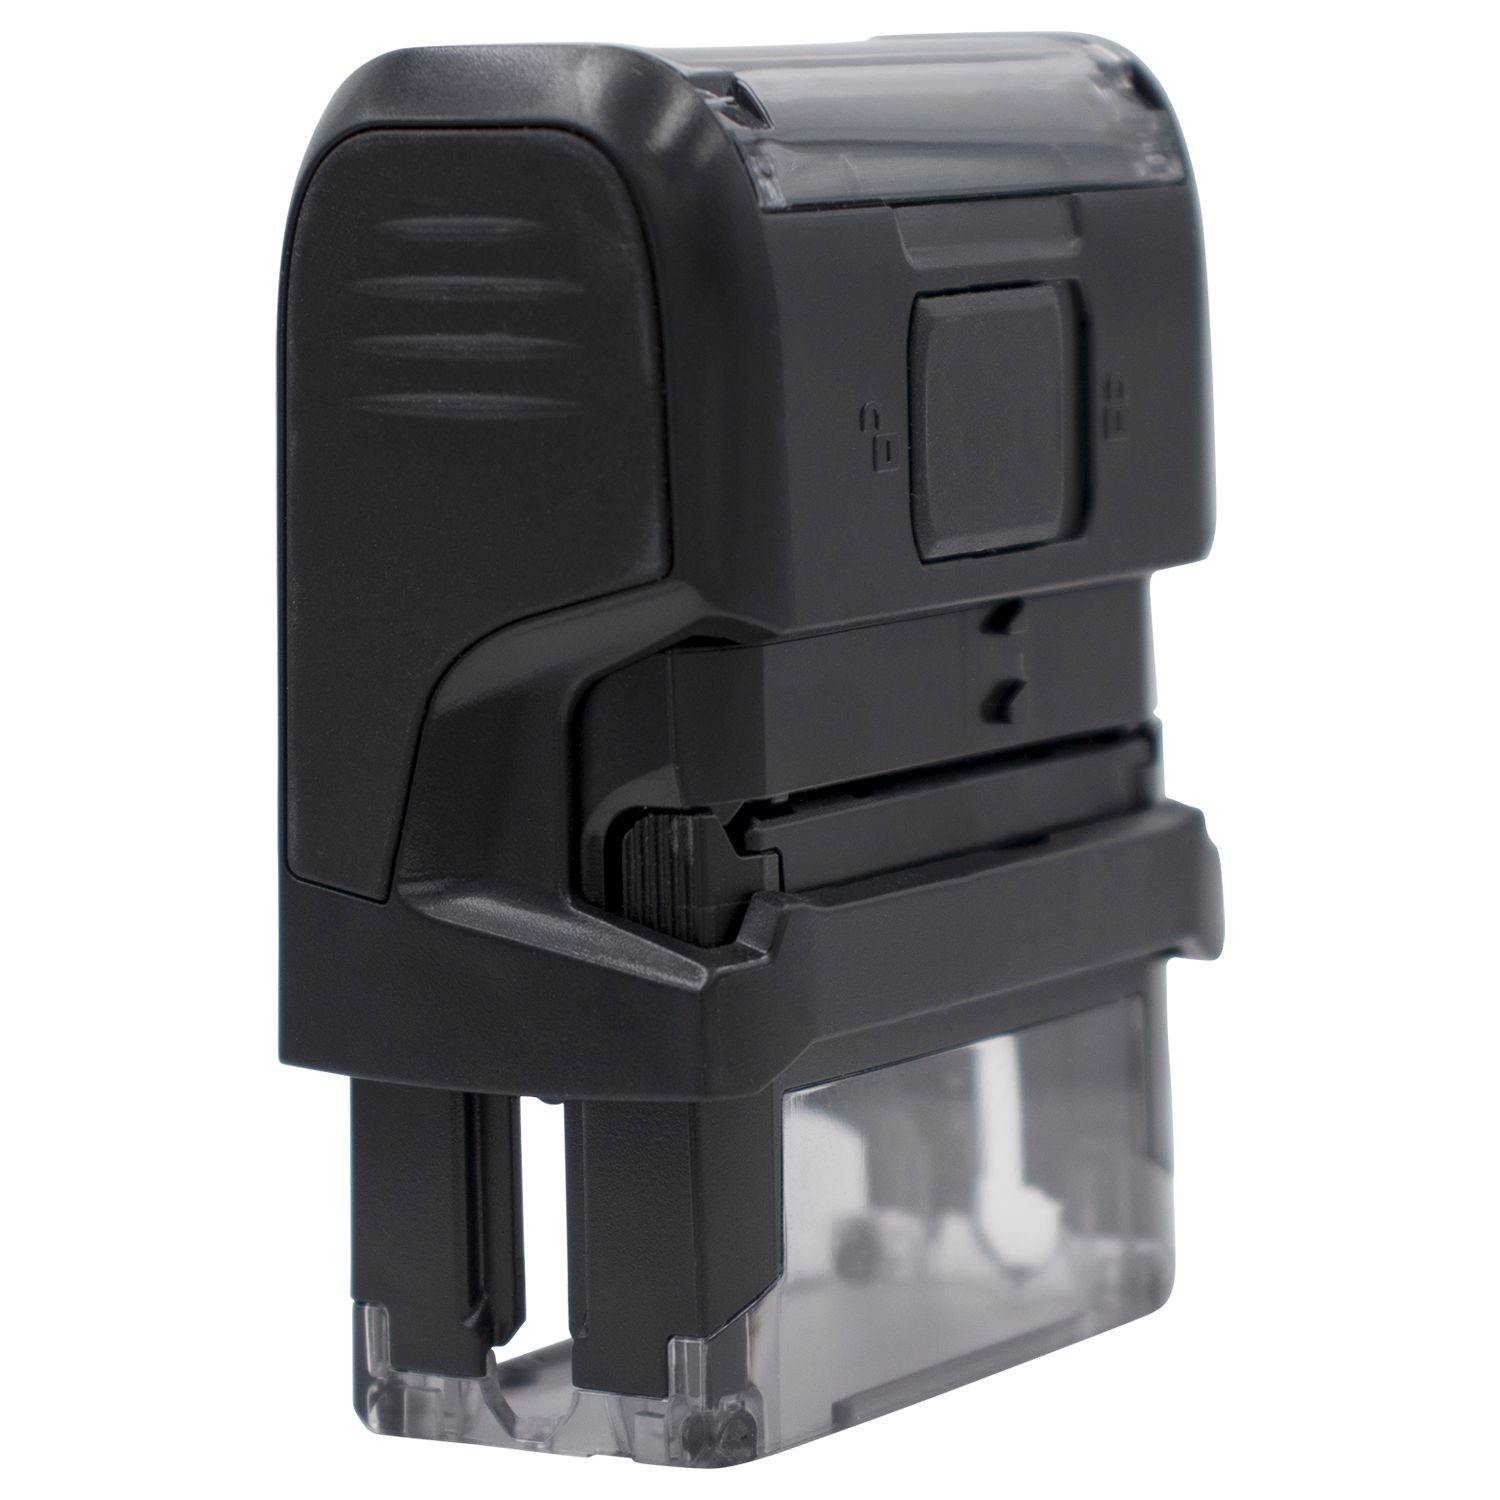 Large Self-Inking Archivado Stamp Back View